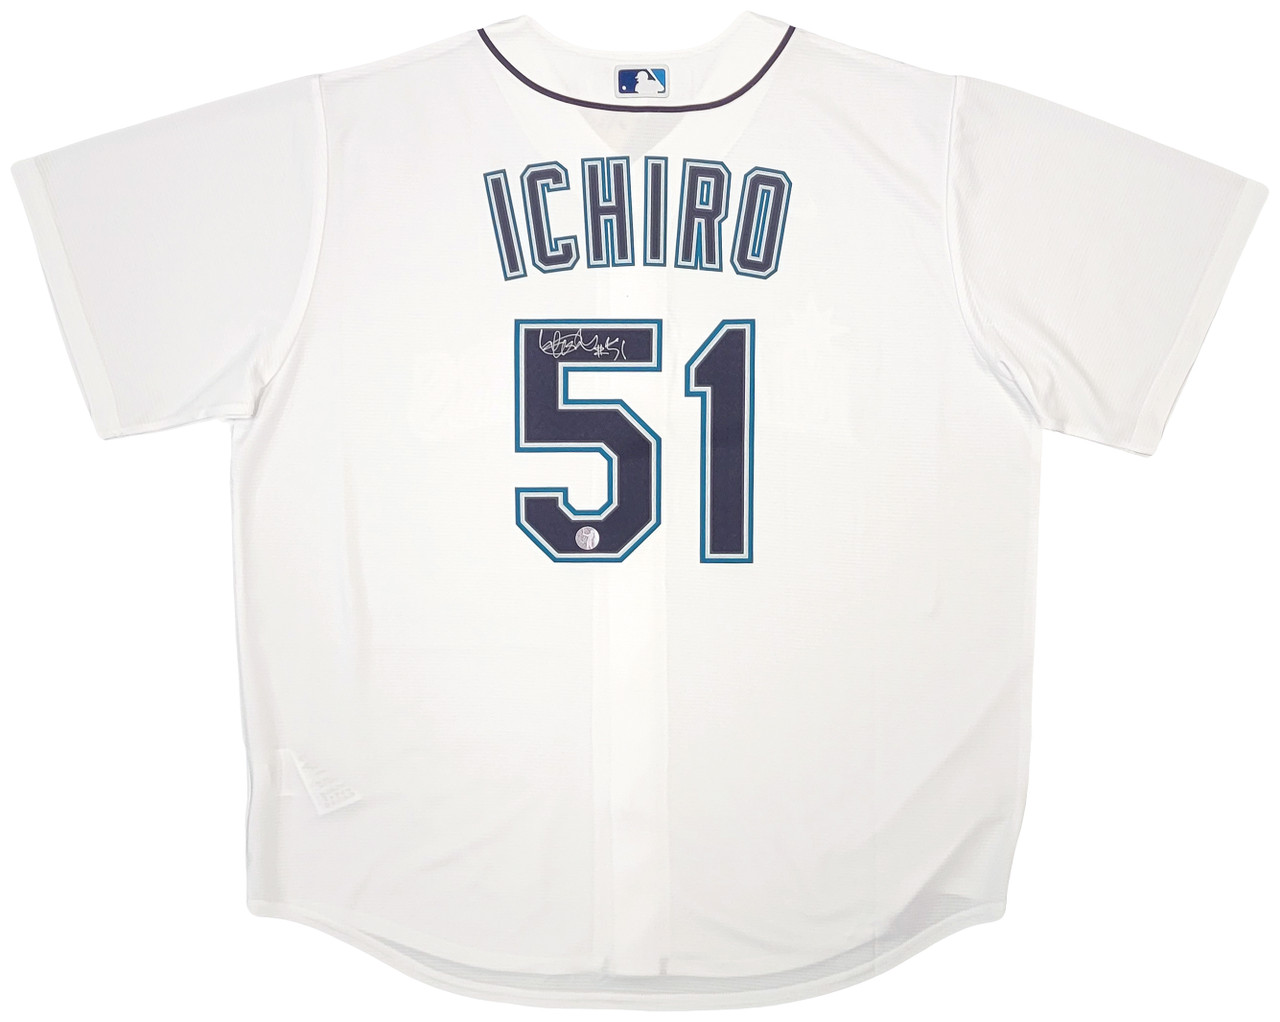 Ichiro Suzuki Signed/Auto Seattle Mariners Jersey Marlins Yankees PSA DNA  CERT - Autographed MLB Jerseys at 's Sports Collectibles Store